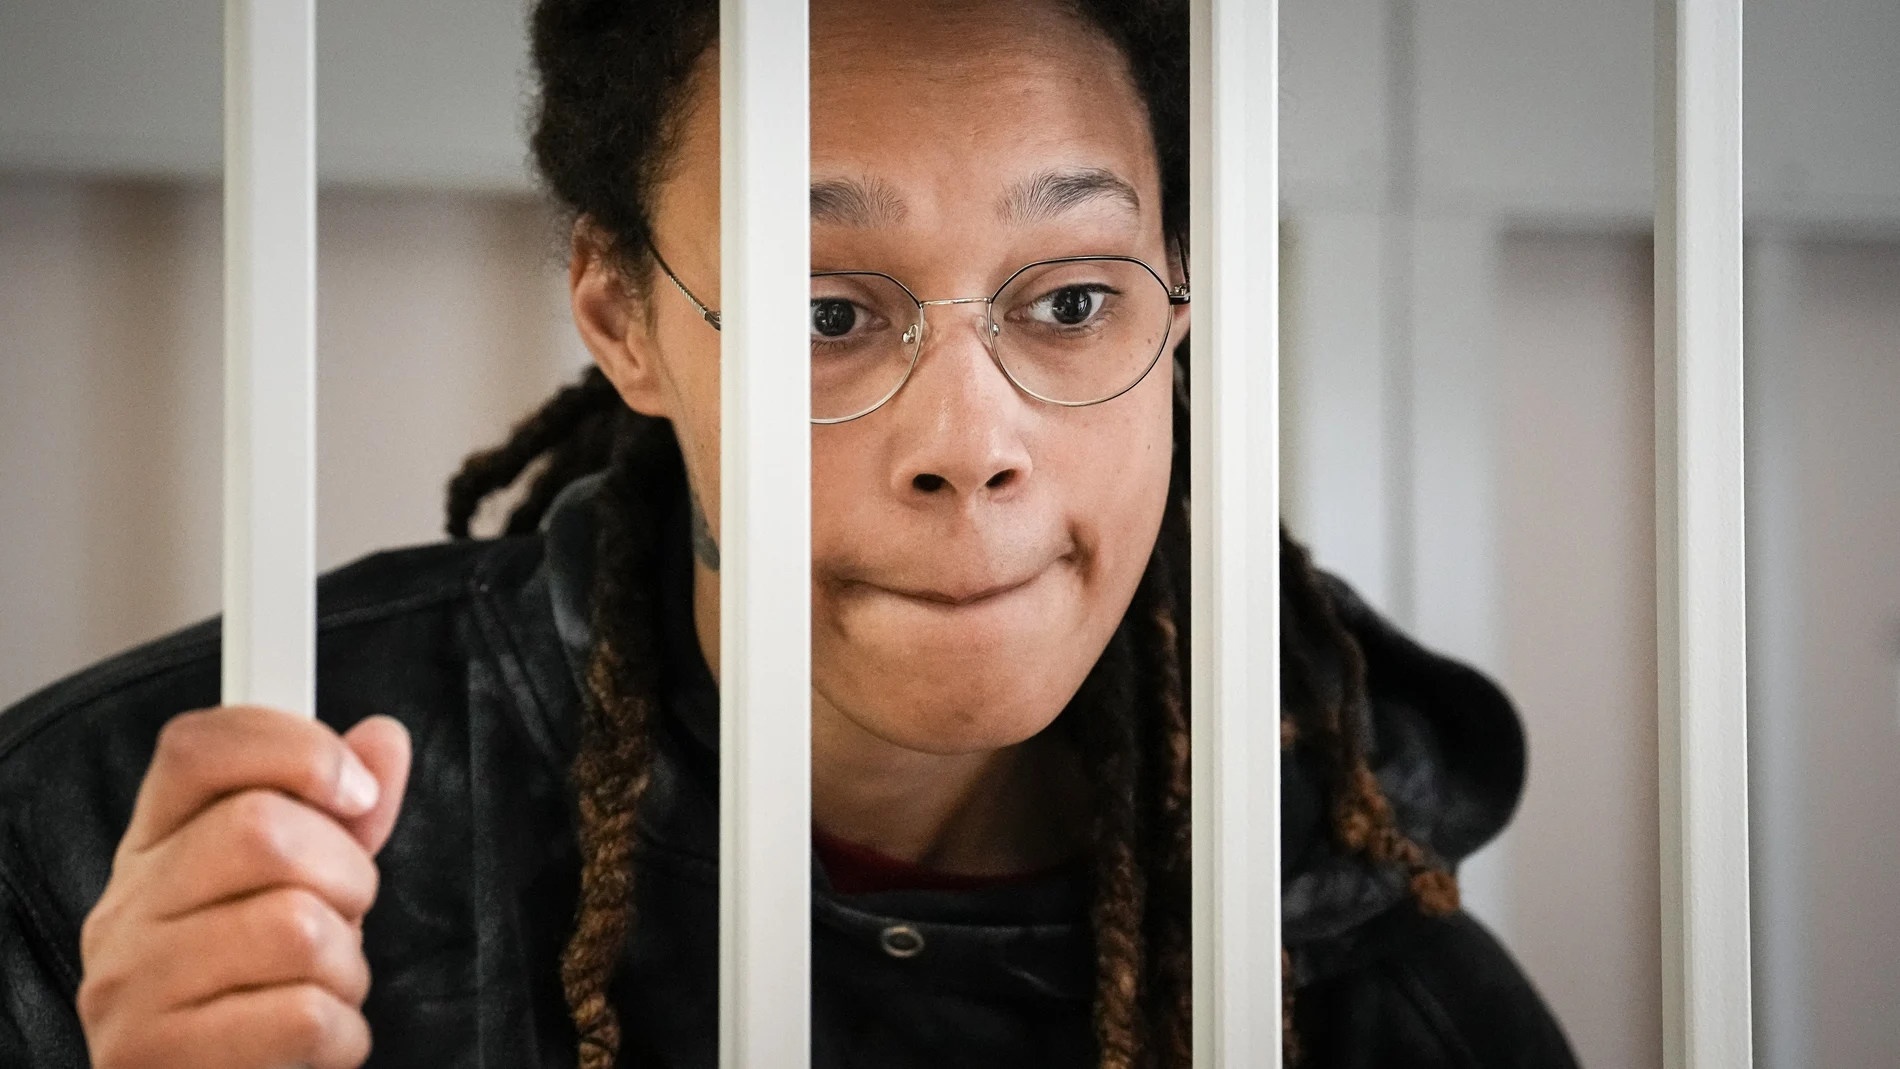 FILE - WNBA star and two-time Olympic gold medalist Brittney Griner speaks to her lawyers standing in a cage at a court room prior to a hearing, in Khimki just outside Moscow, Russia, Tuesday, July 26, 2022. A Russian court has on Tuesday, Oct. 23 started hearing American basketball star Brittney Griner's appeal against her nine-year prison sentence for drug possession. (AP Photo/Alexander Zemlianichenko, Pool, File)